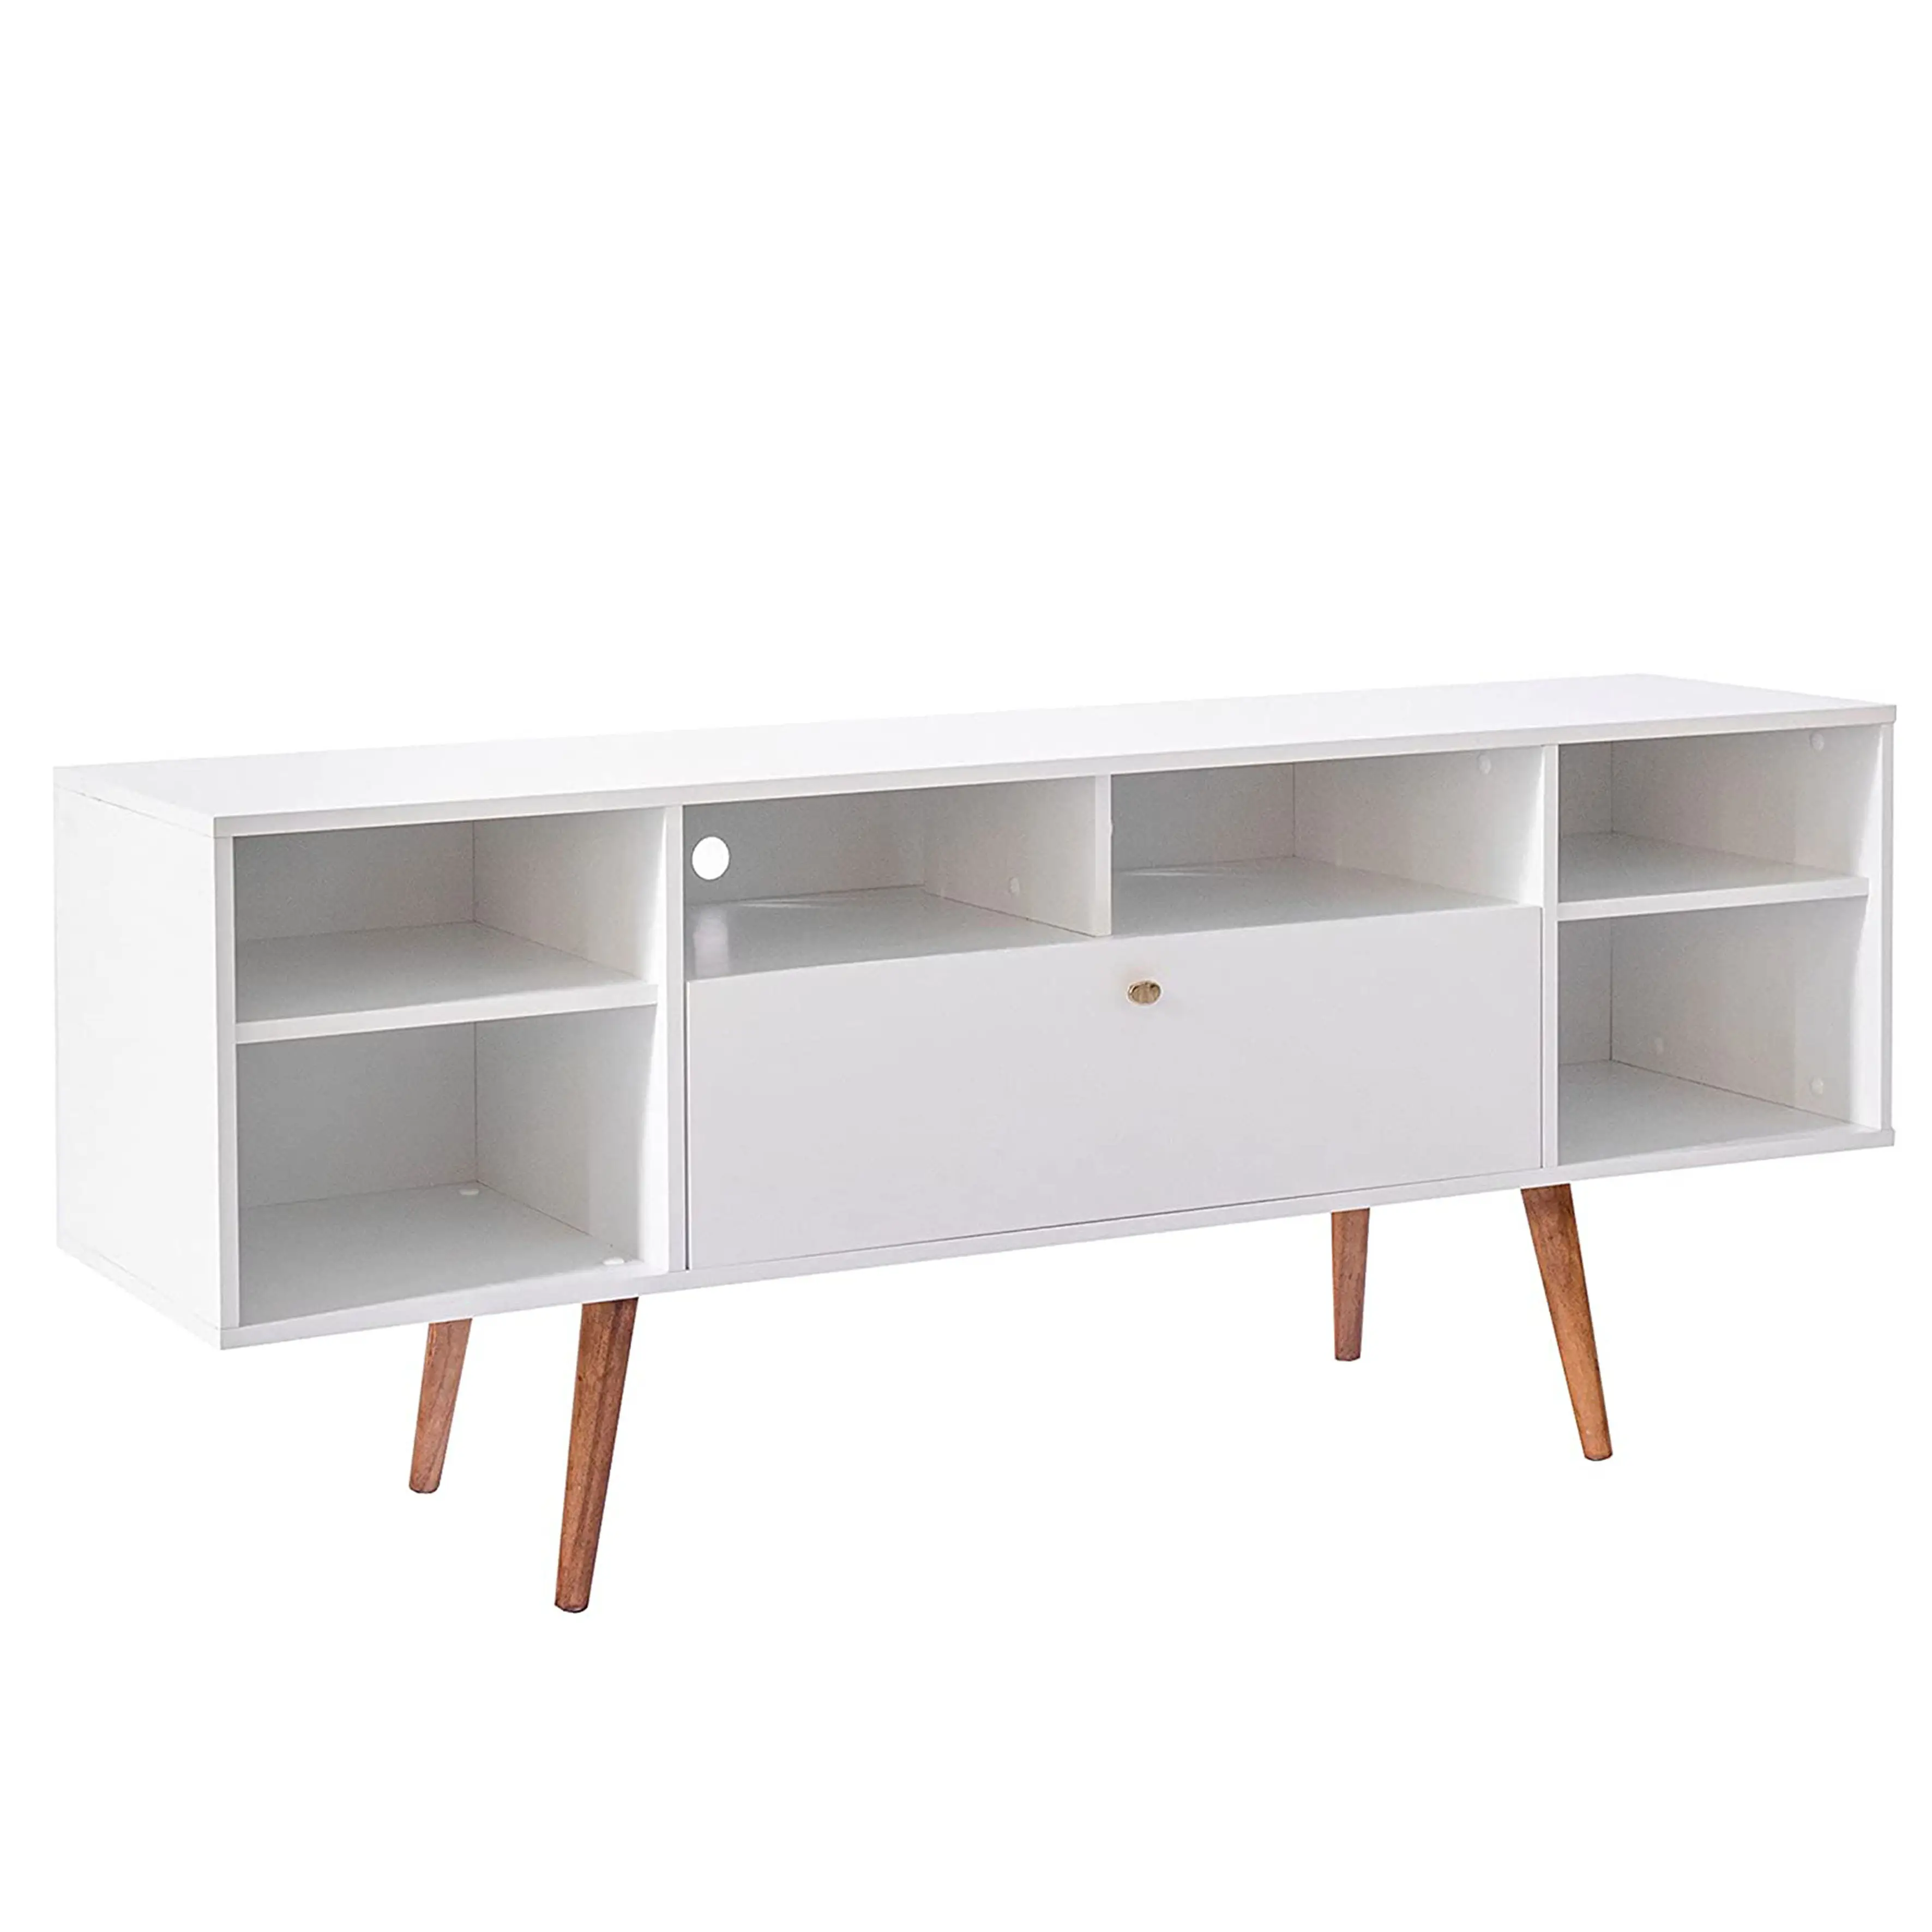 TV Stand cetre table Living Room Coffee Center Table Wooden Cabinet White Marble Tv Stand drawer of chest